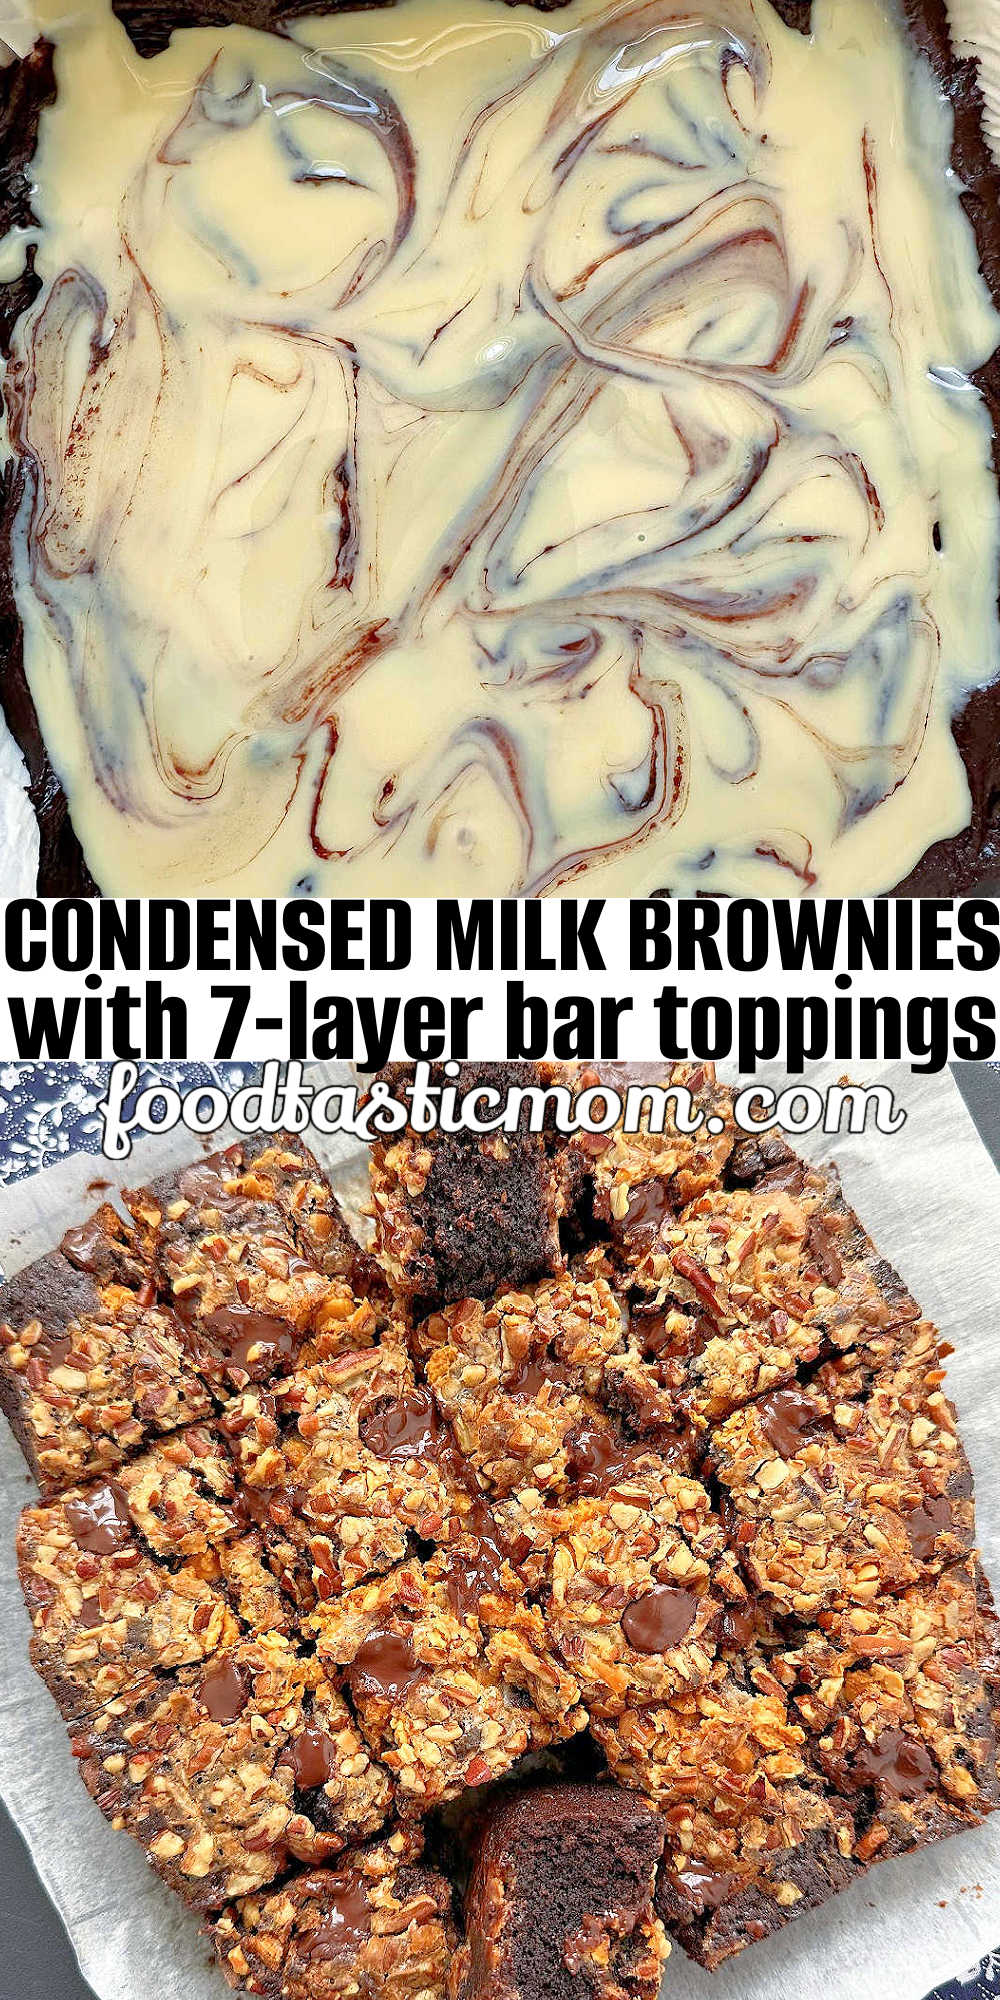 Condensed Milk Brownies | Foodtastic Mom #brownierecipes #onebowlbrownies #condensedmilkbrownies These quick and easy, one bowl brownies include sweetened condensed milk in the batter for an extra rich texture. Plus they are topped like seven layer bars with more condensed milk, chocolate and butterscotch chips, coconut and nuts. They are perfect with a scoop of ice cream! via @foodtasticmom